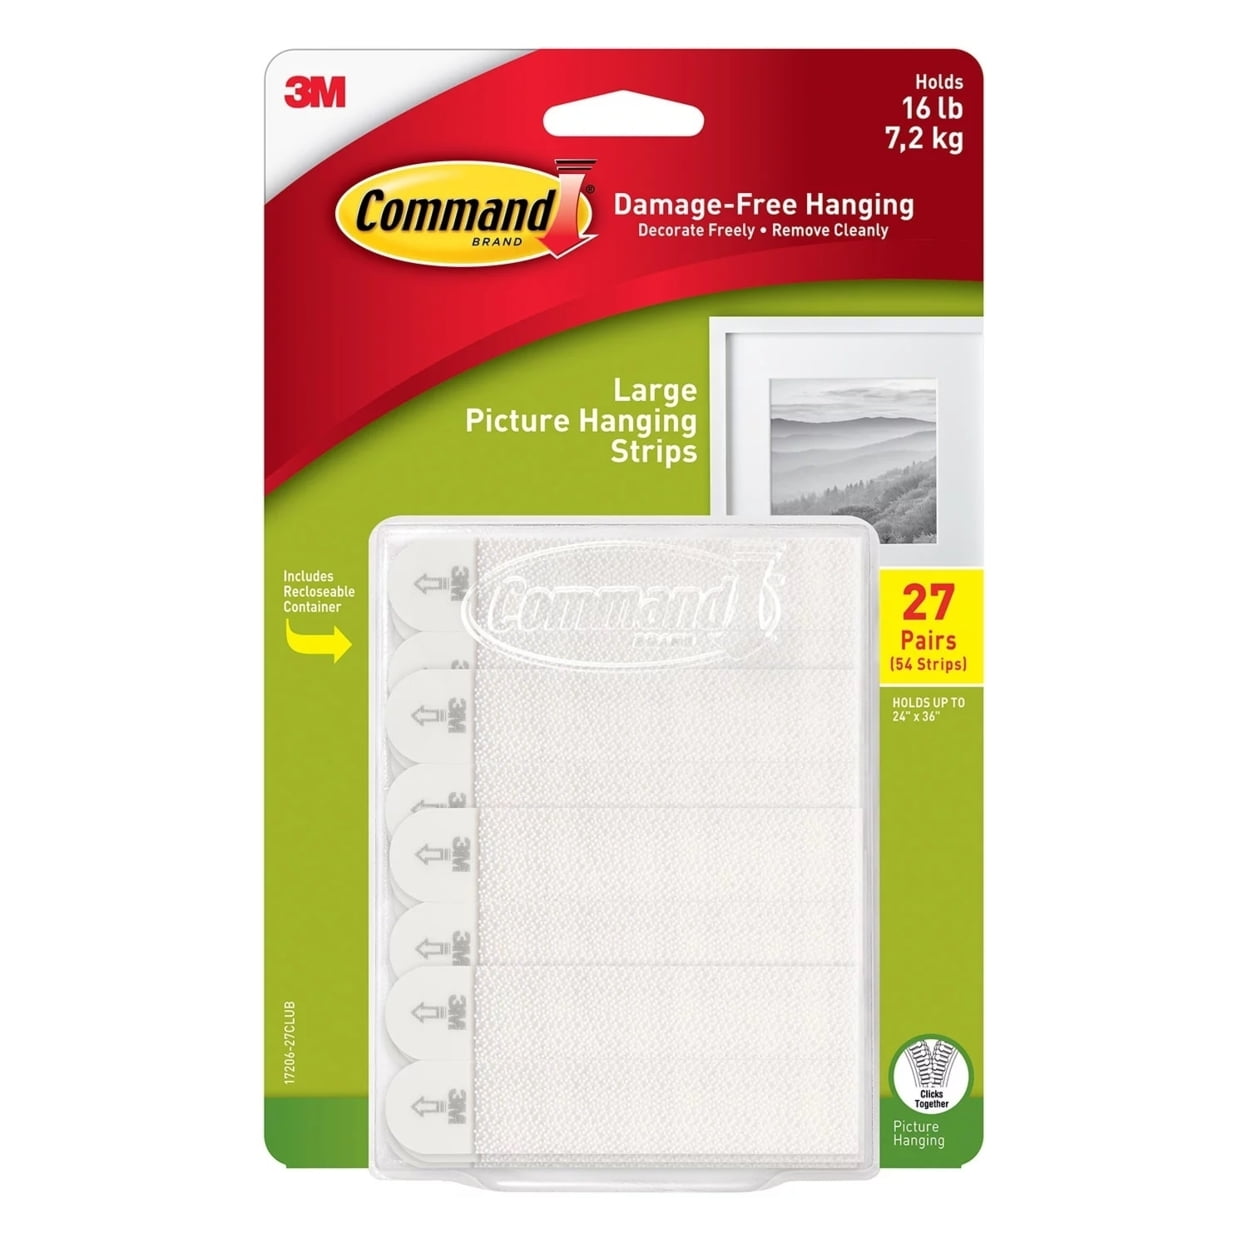 Command Large Picture Hanging Strips 27 Pairs/Pack